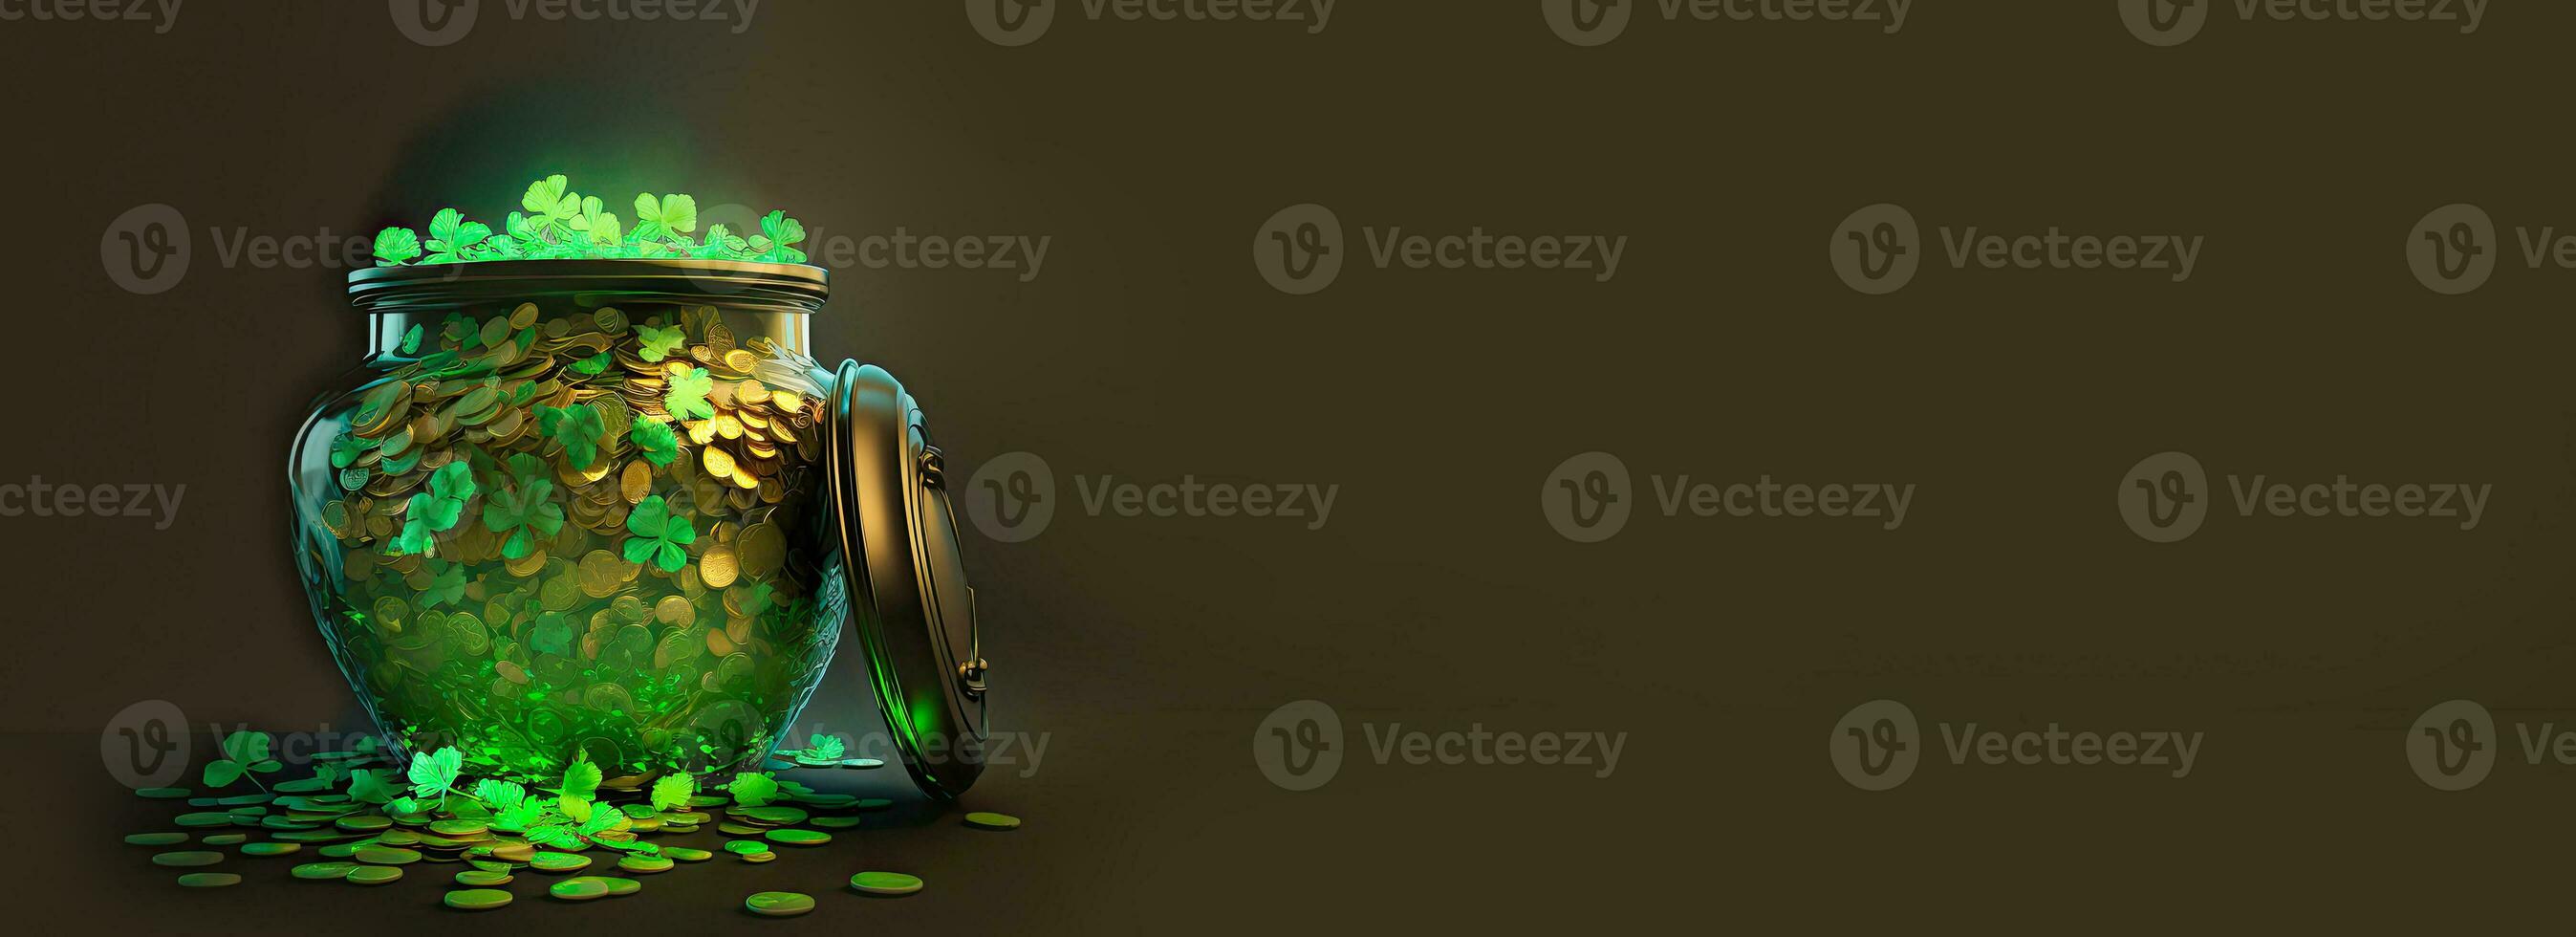 3D Render, Transparent Pot Full of Golden Coins With Clover Leaves On Dark Background. St. Patrick's Day Concept. photo